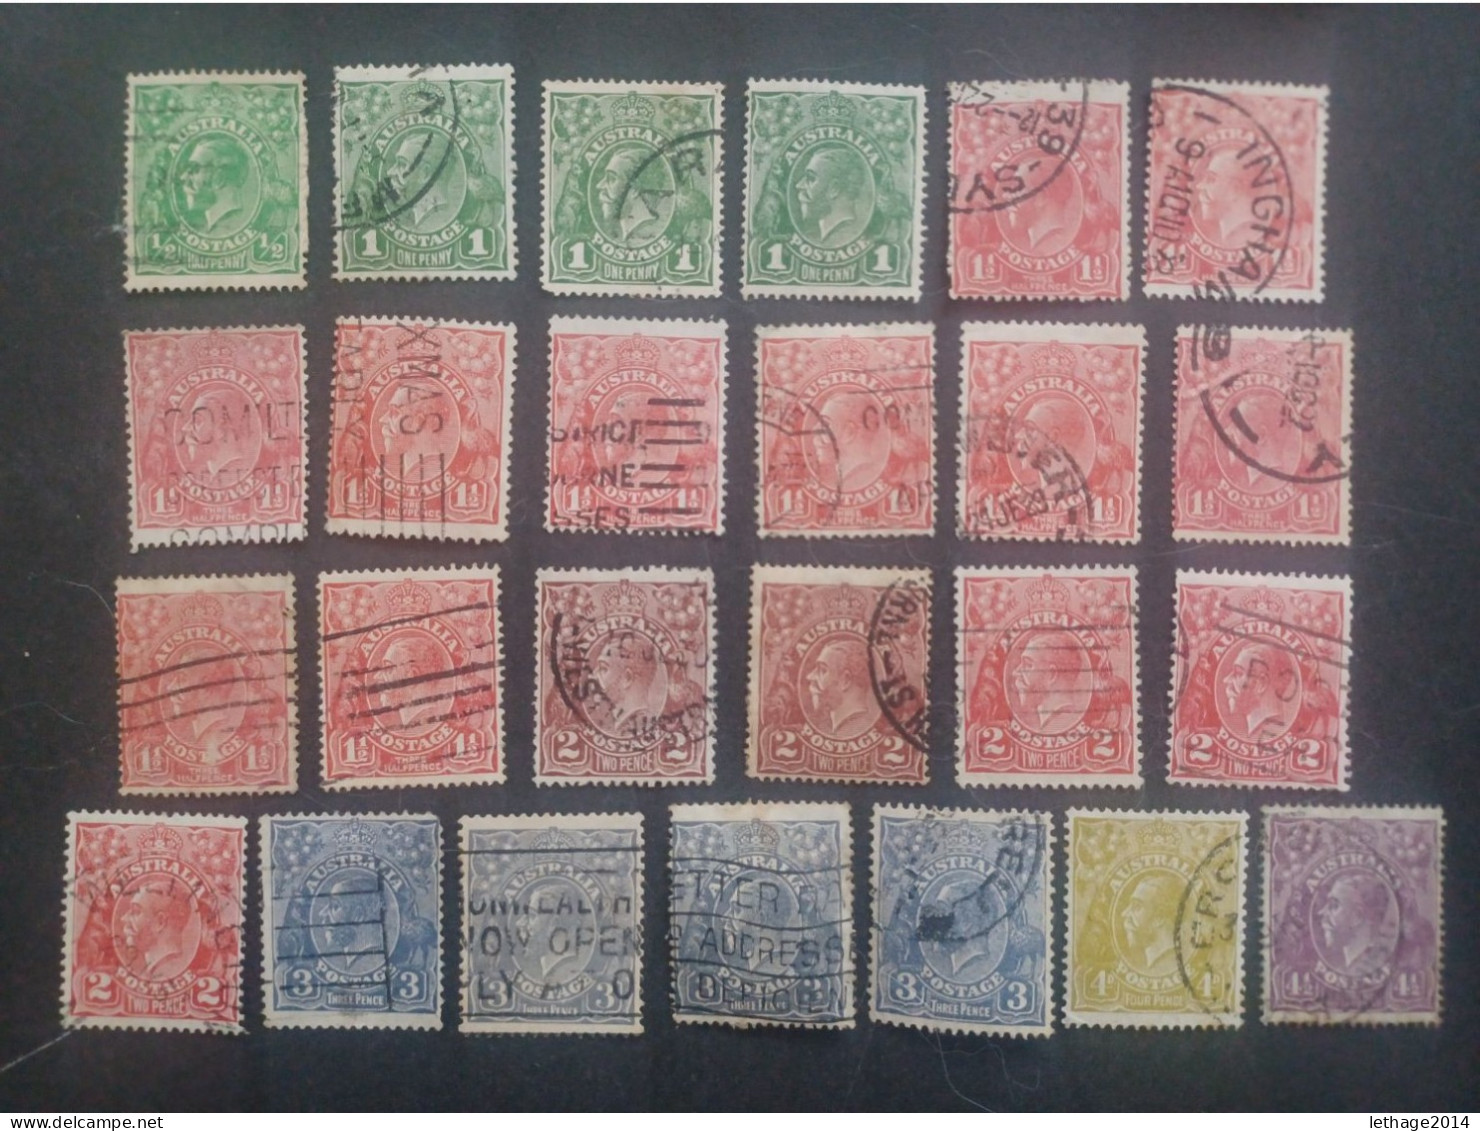 AUSTRALIA 1913 KANGOROO + KING GEORGE V + STOCK LOT MIX 33 SCANNERS MANY STAMPS FRAGMANT PERFIN - Colecciones